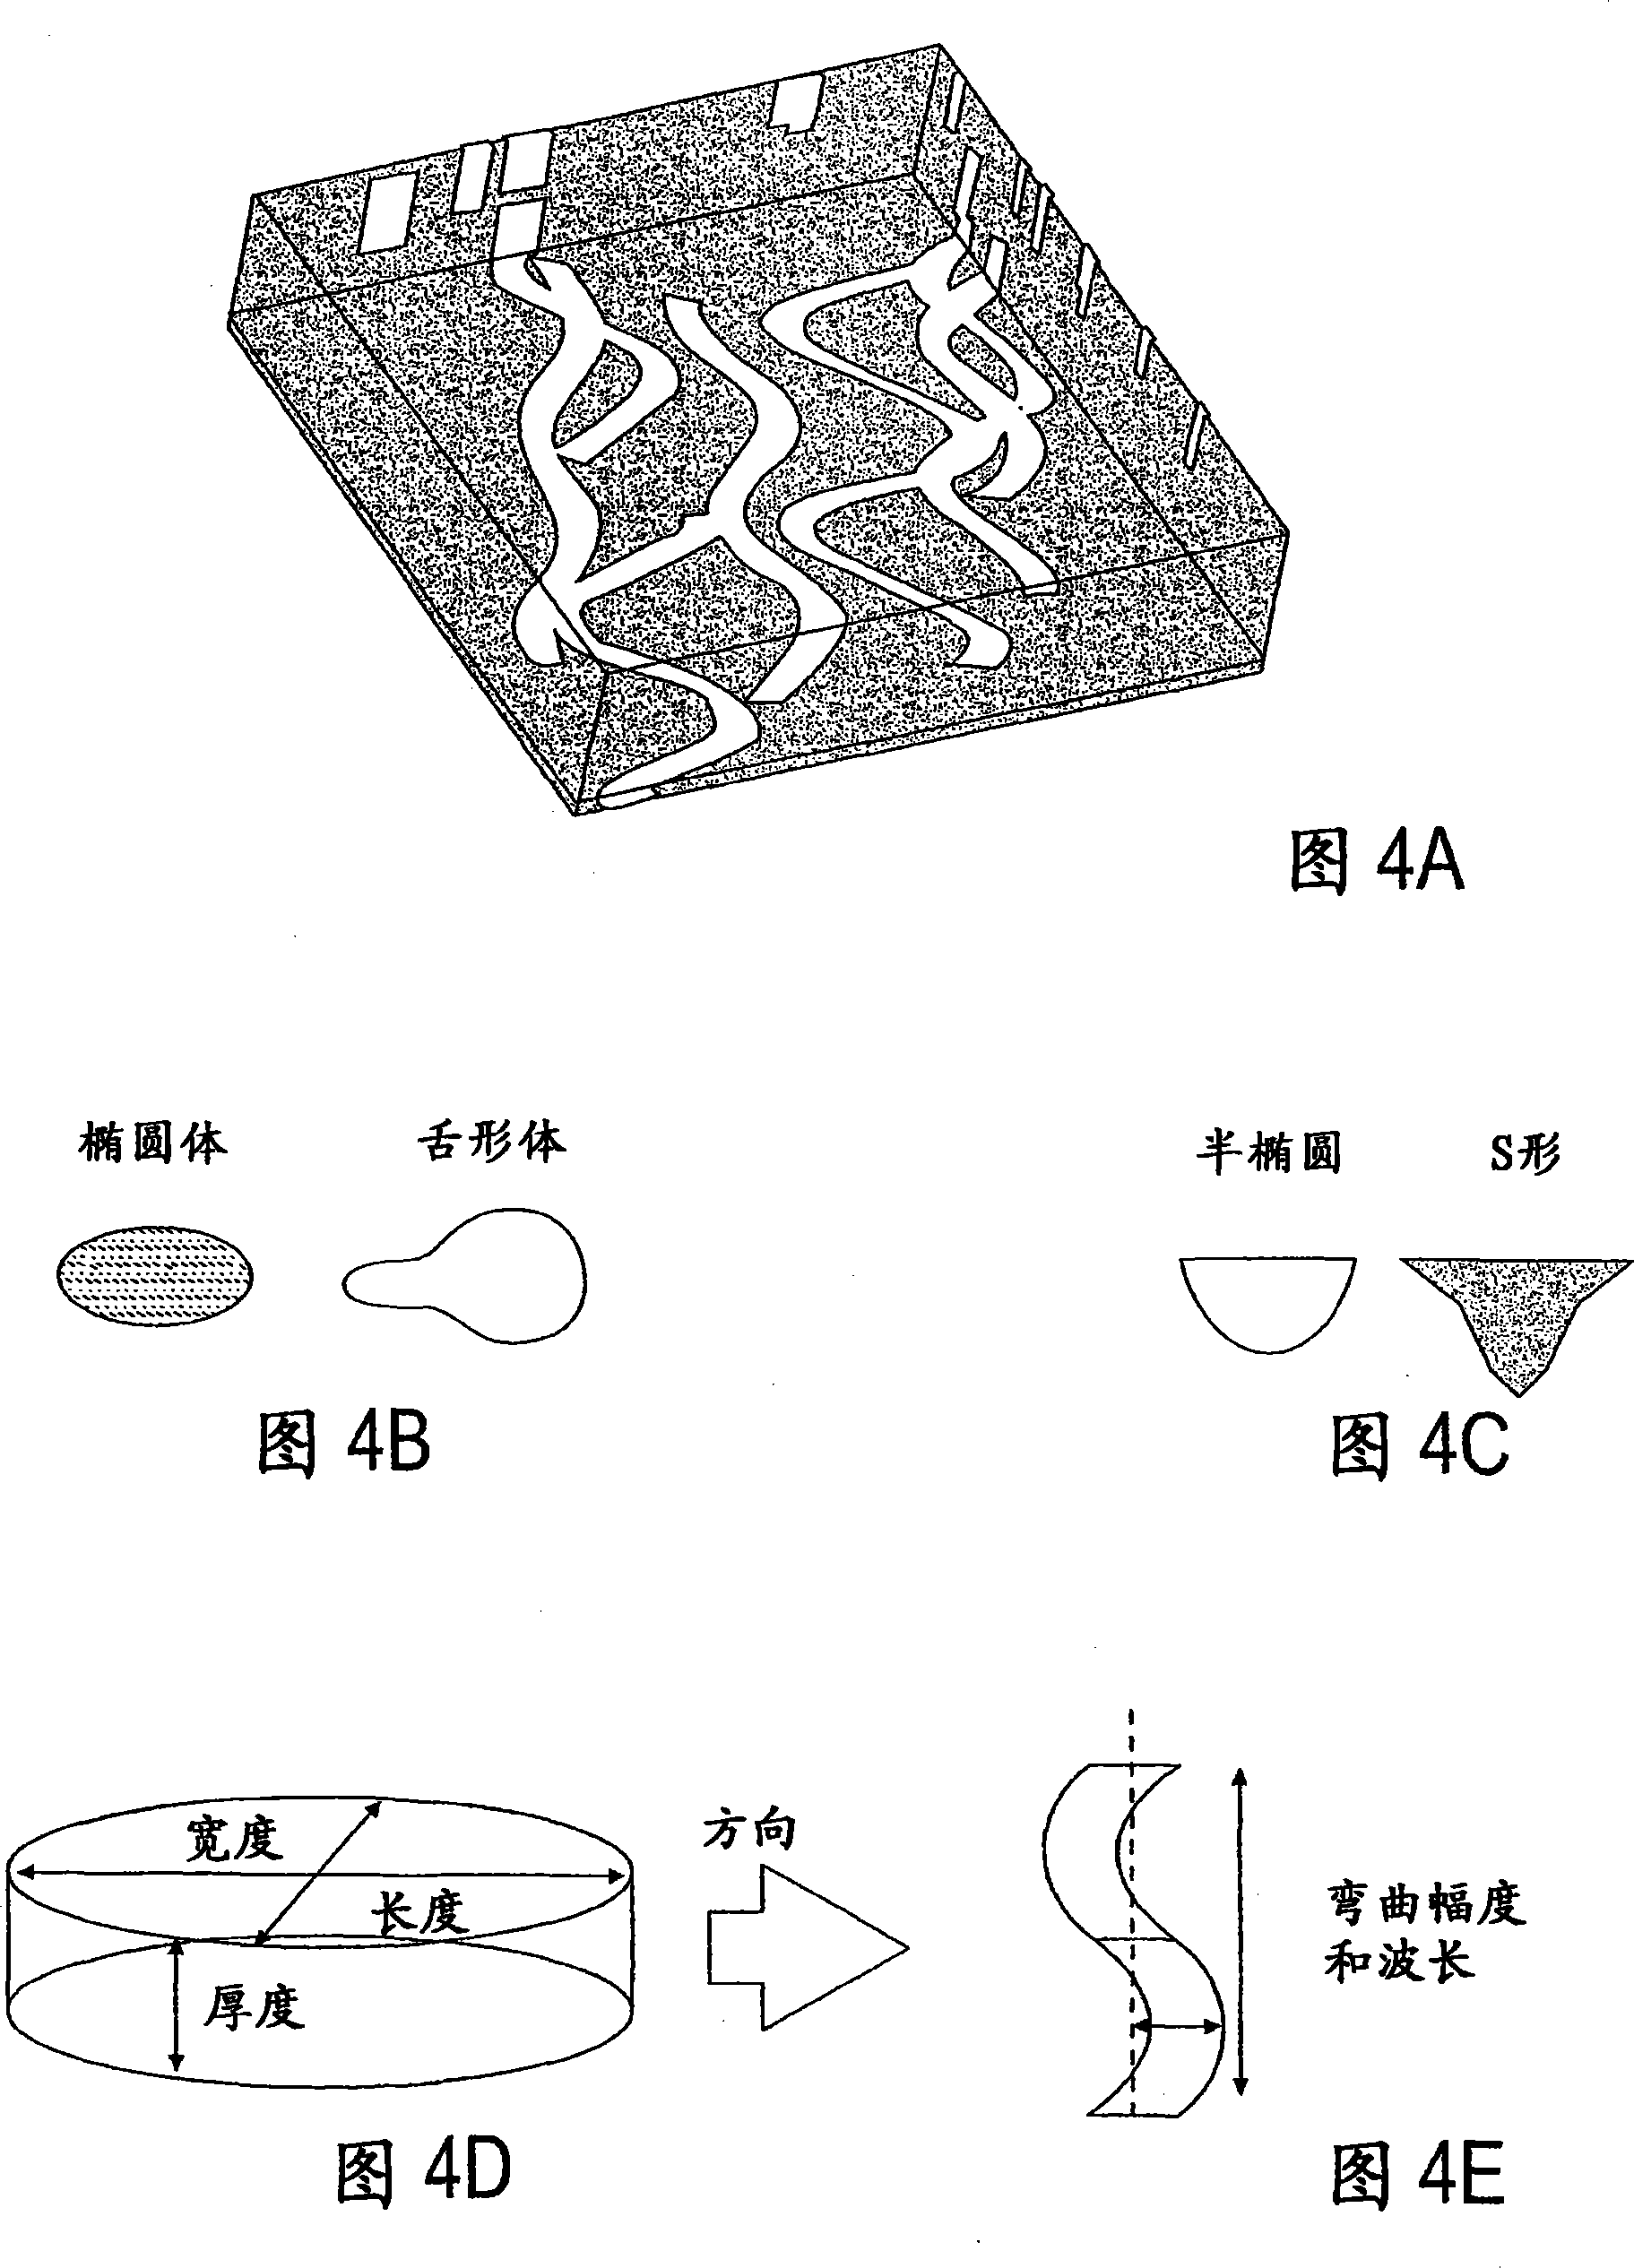 Method for making a reservoir facies model utilizing a training image and a geologically interpreted facies probability cube